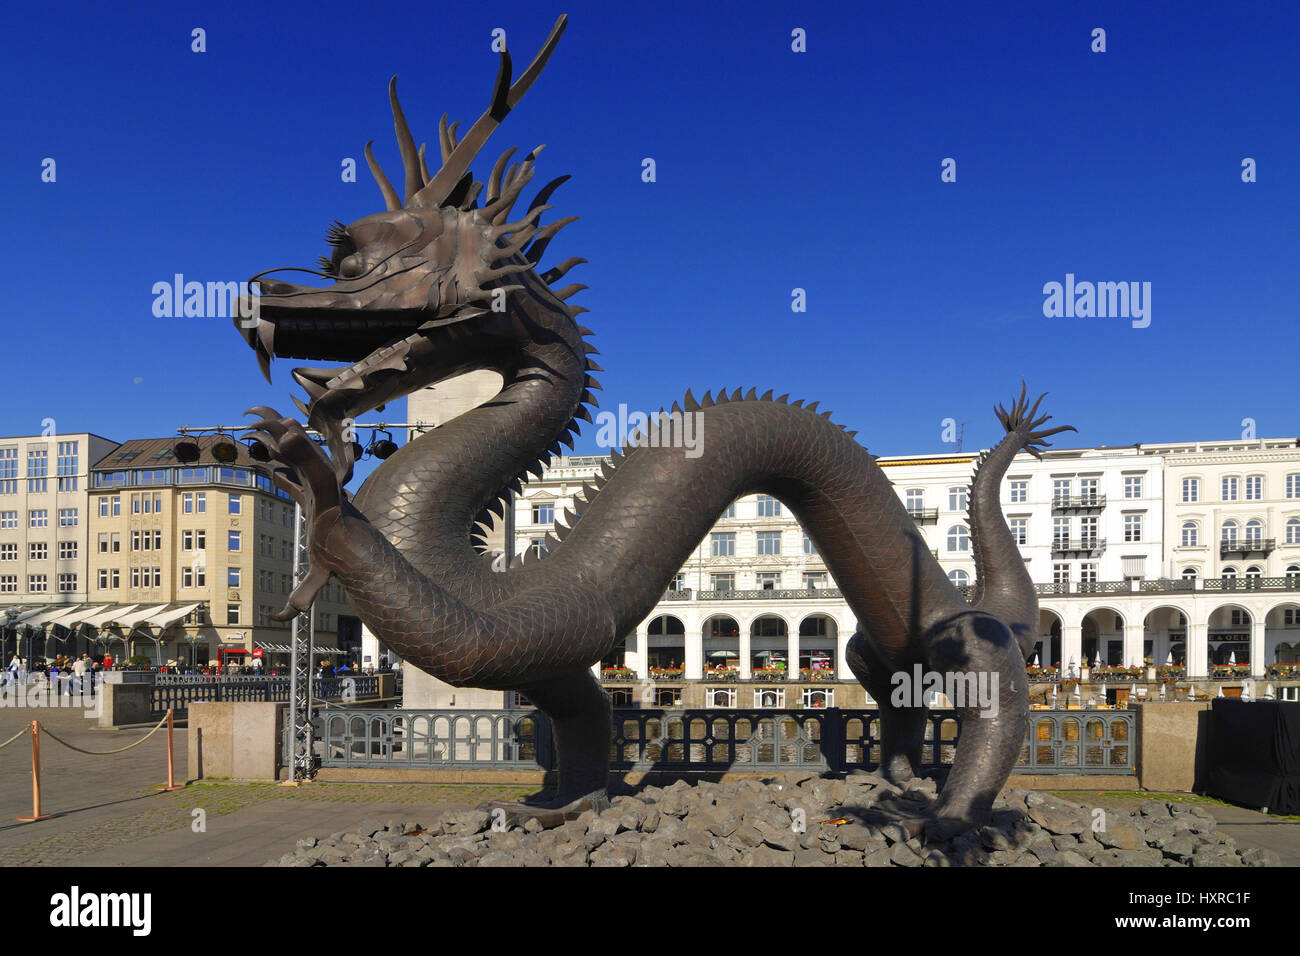 Hamburg, Germany, Europe, town, towns, Gro? town, Gro? towns, day, during the day, hamburger, dragon, dragon, Chinese, Chinese, sculpture, sculptures, Stock Photo